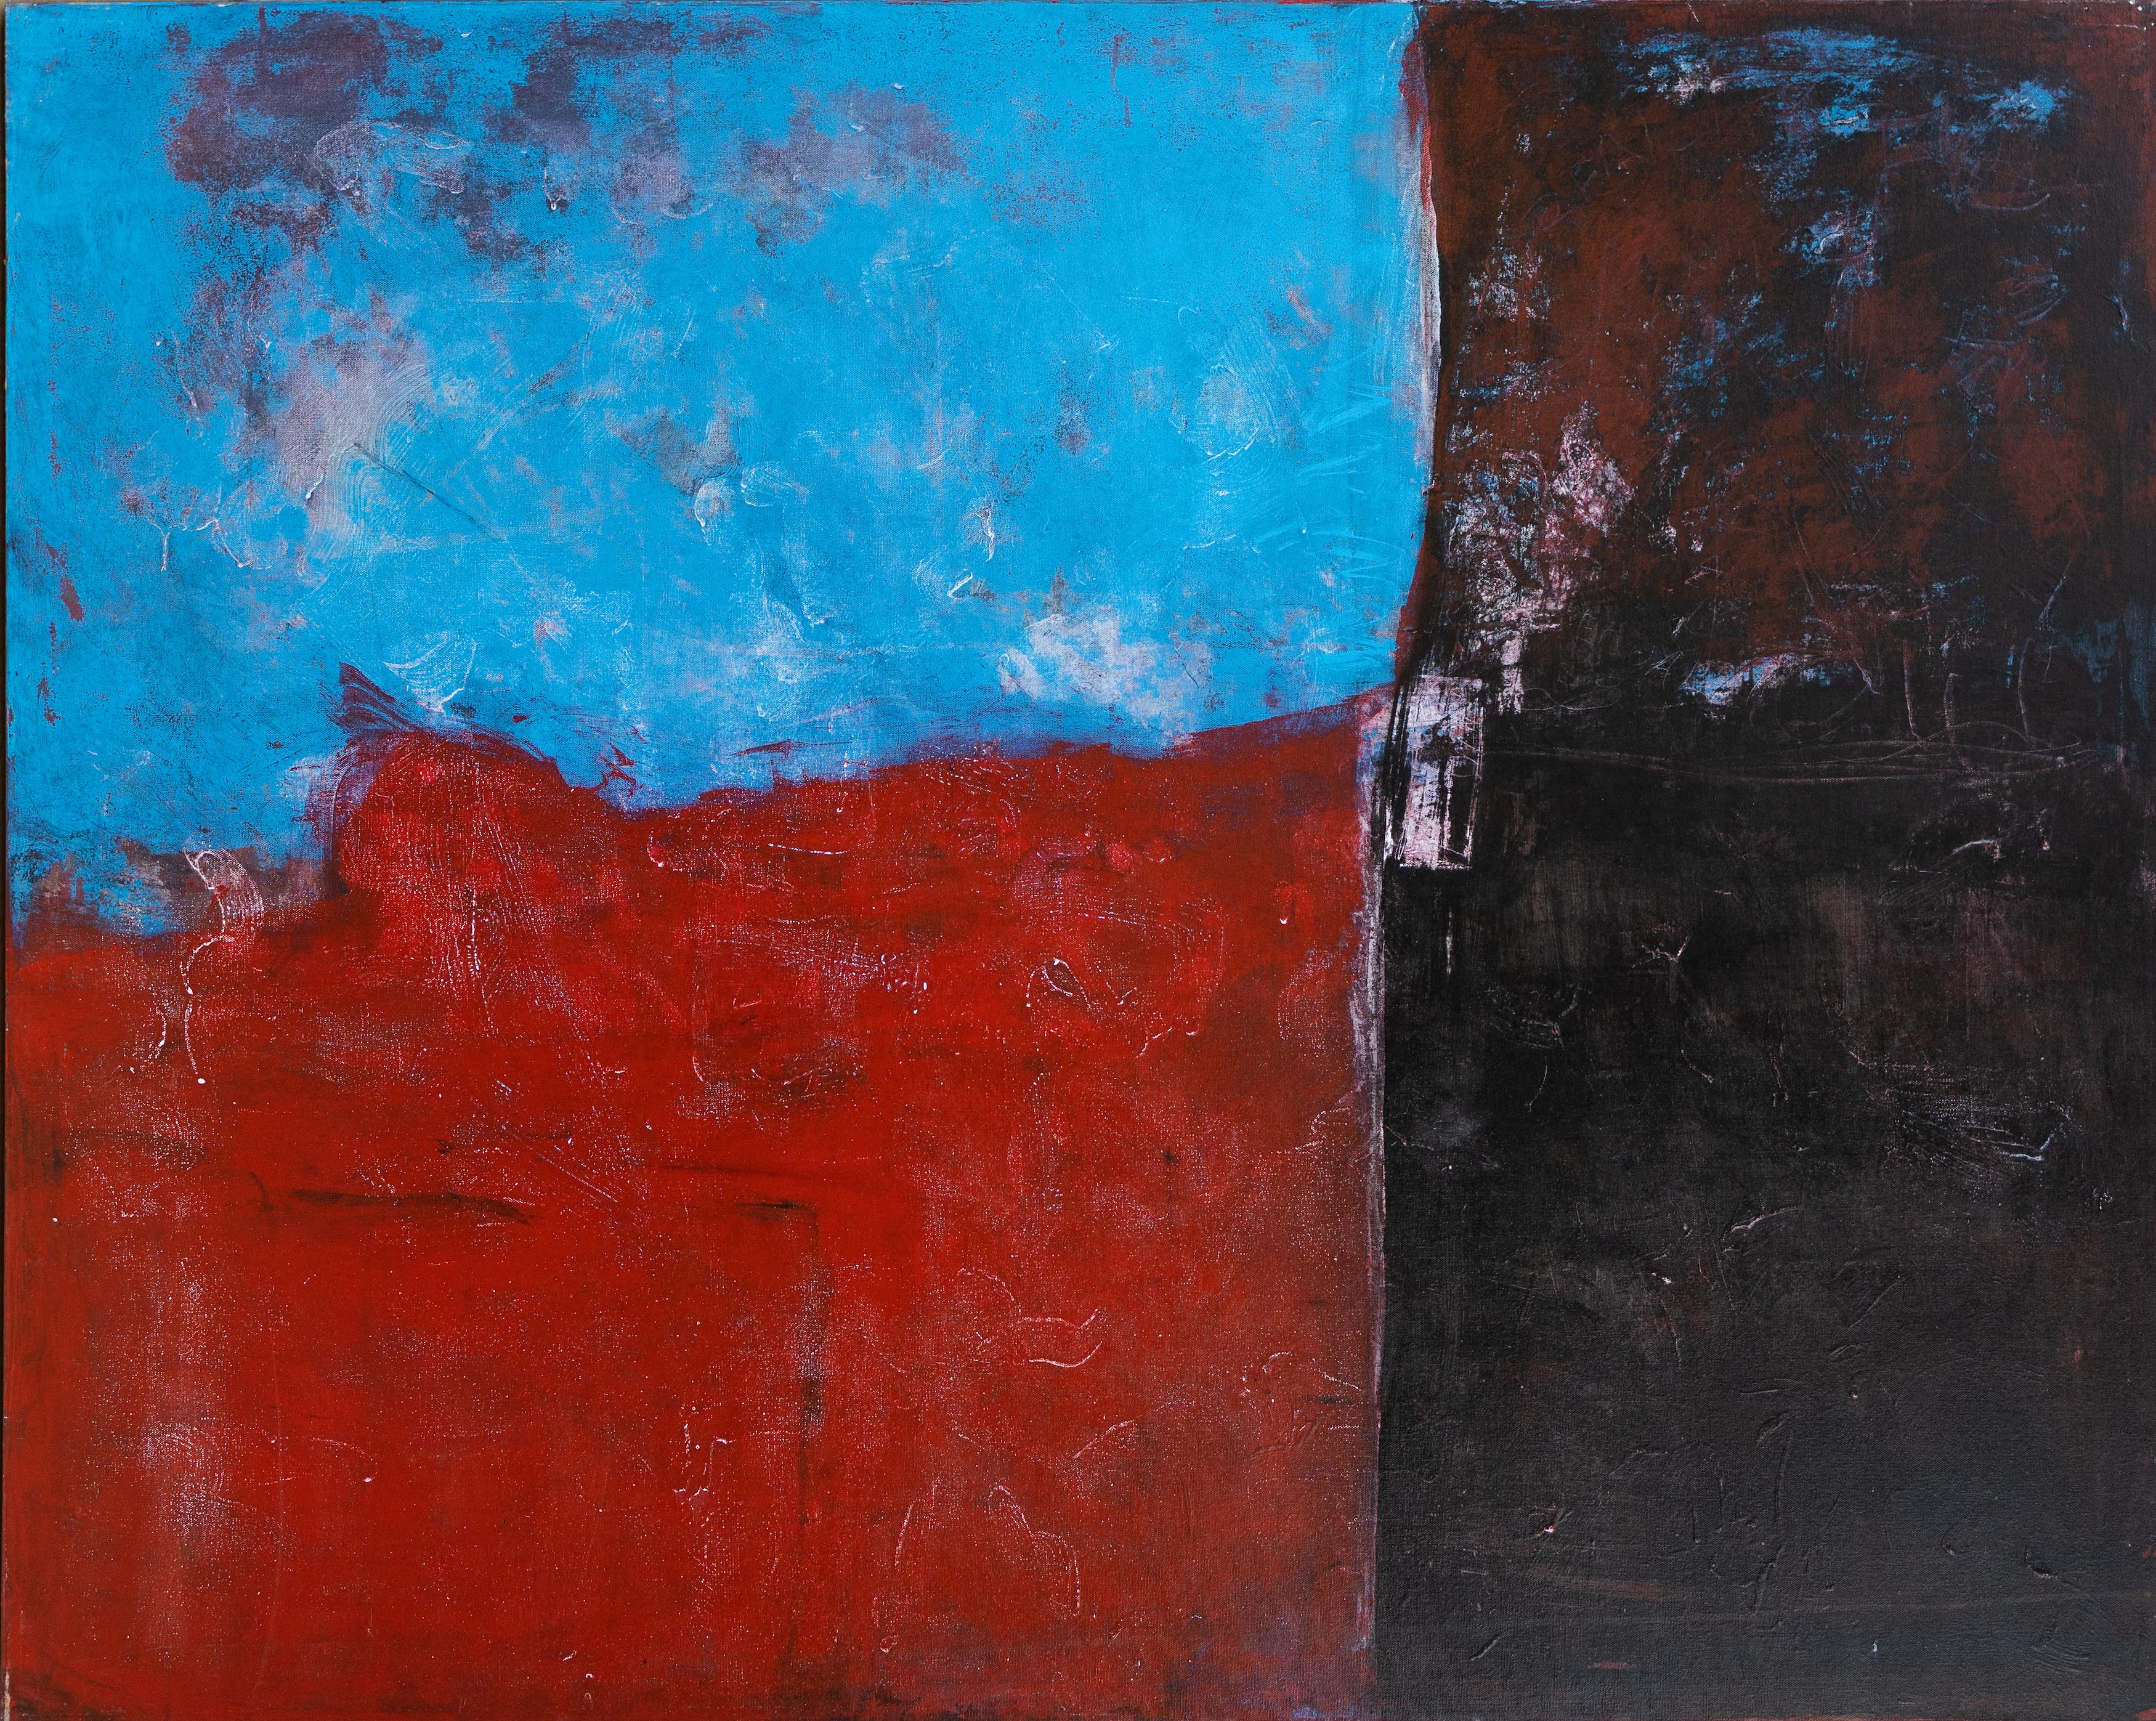 Red, Black and Blue abstract #4 by Tom Reno

Tom Reno is an abstract artist originally from Southern California who now resides in New Mexico. He is the paragon of a free-spirited artist who lives much of his life as a nomad traveling across the